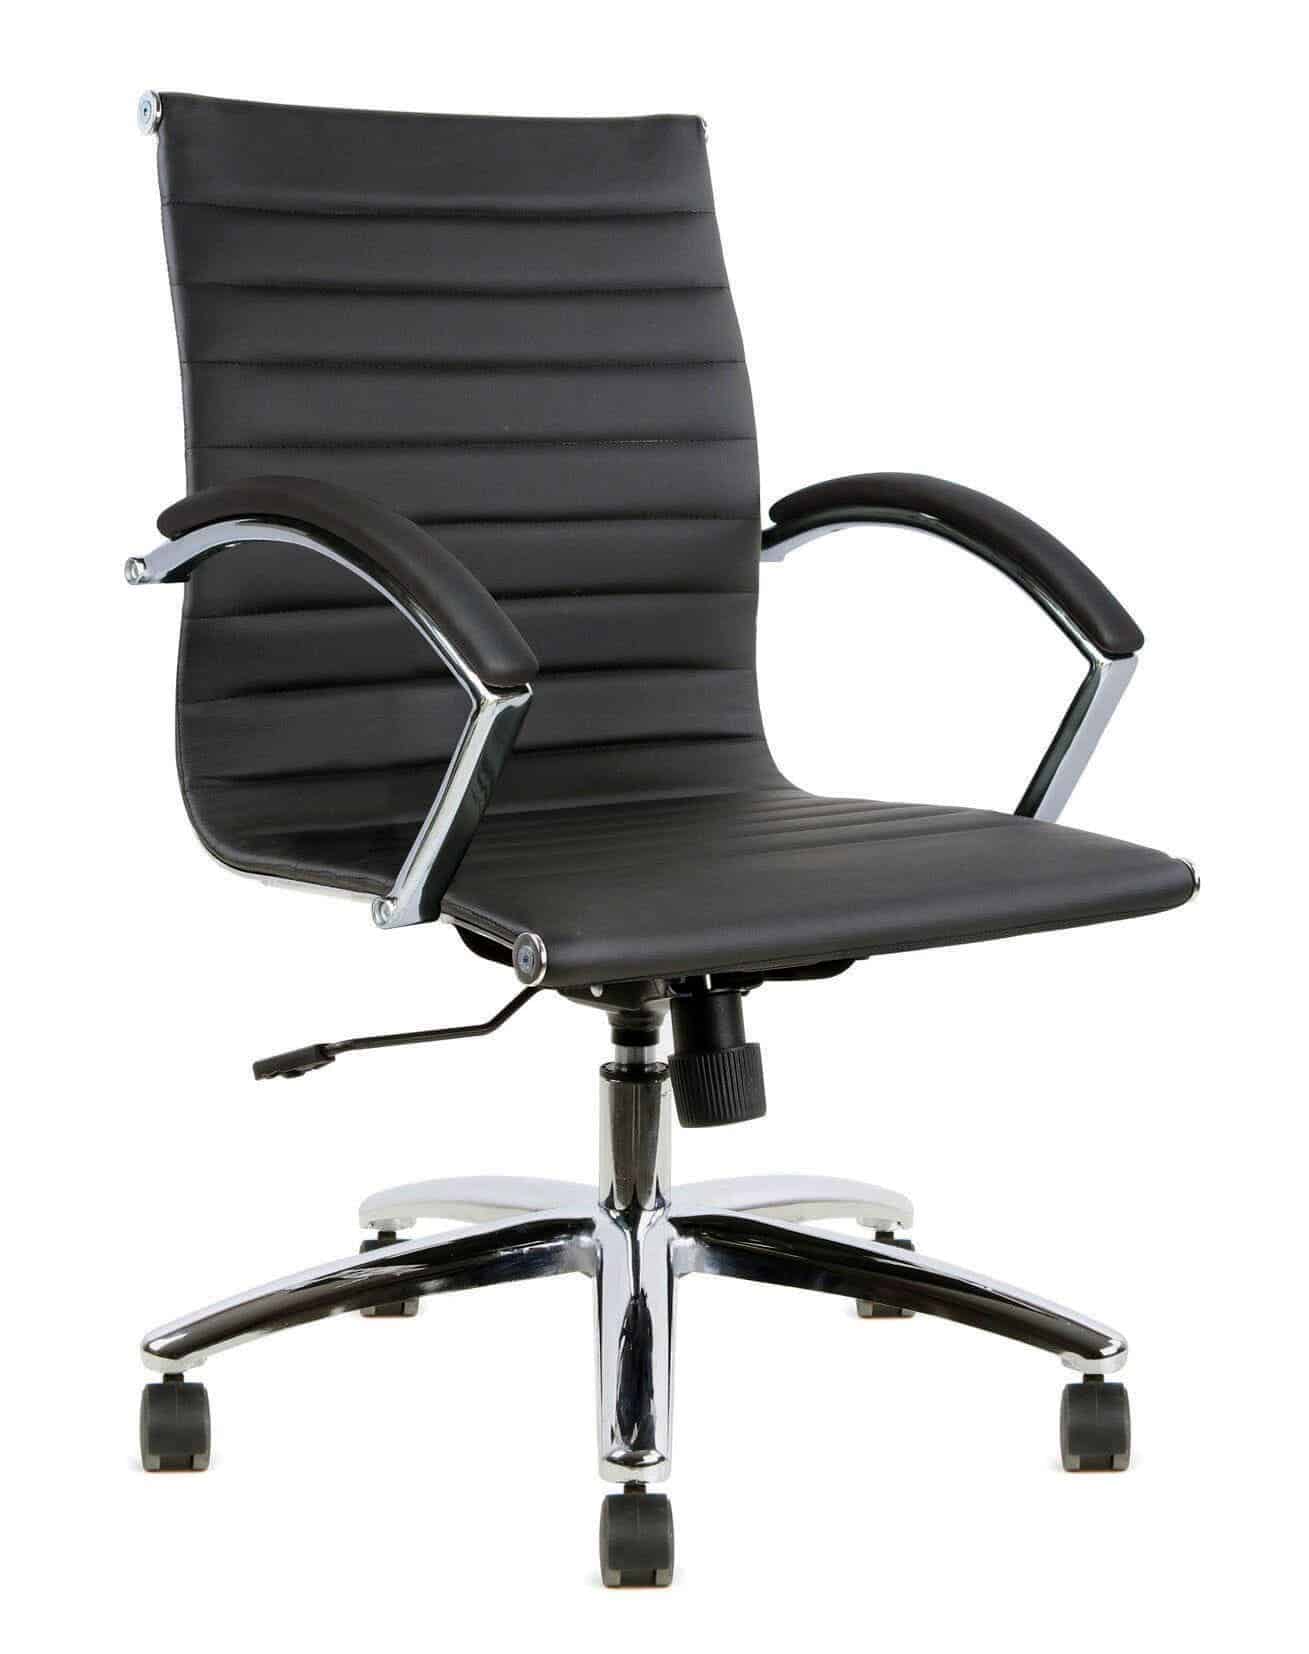 Hmrp001 Mb Mid Back With Arms White Or Black Used Office Furniture Chicago Store Cubicle Concepts